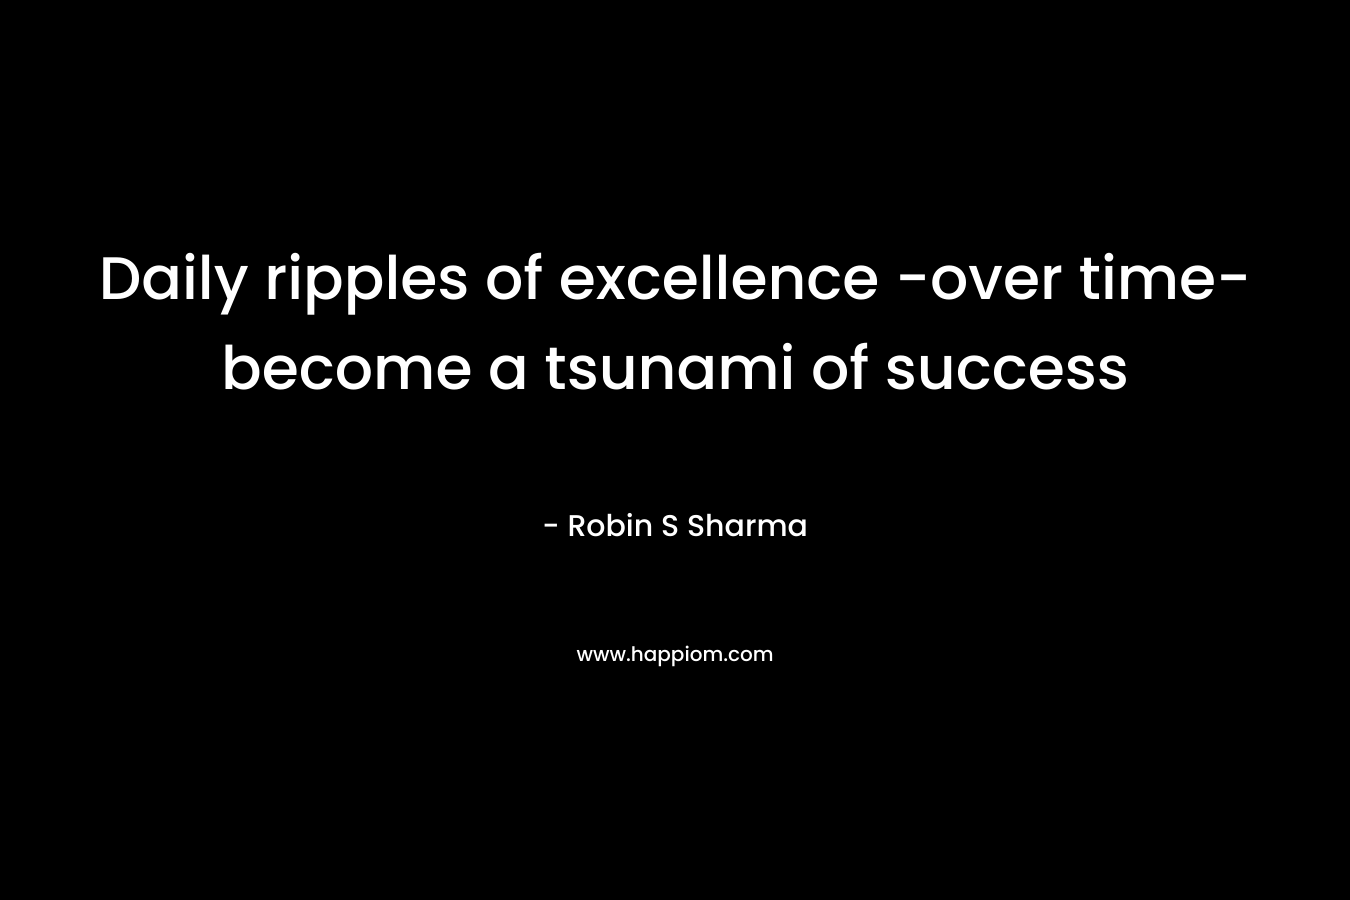 Daily ripples of excellence -over time- become a tsunami of success